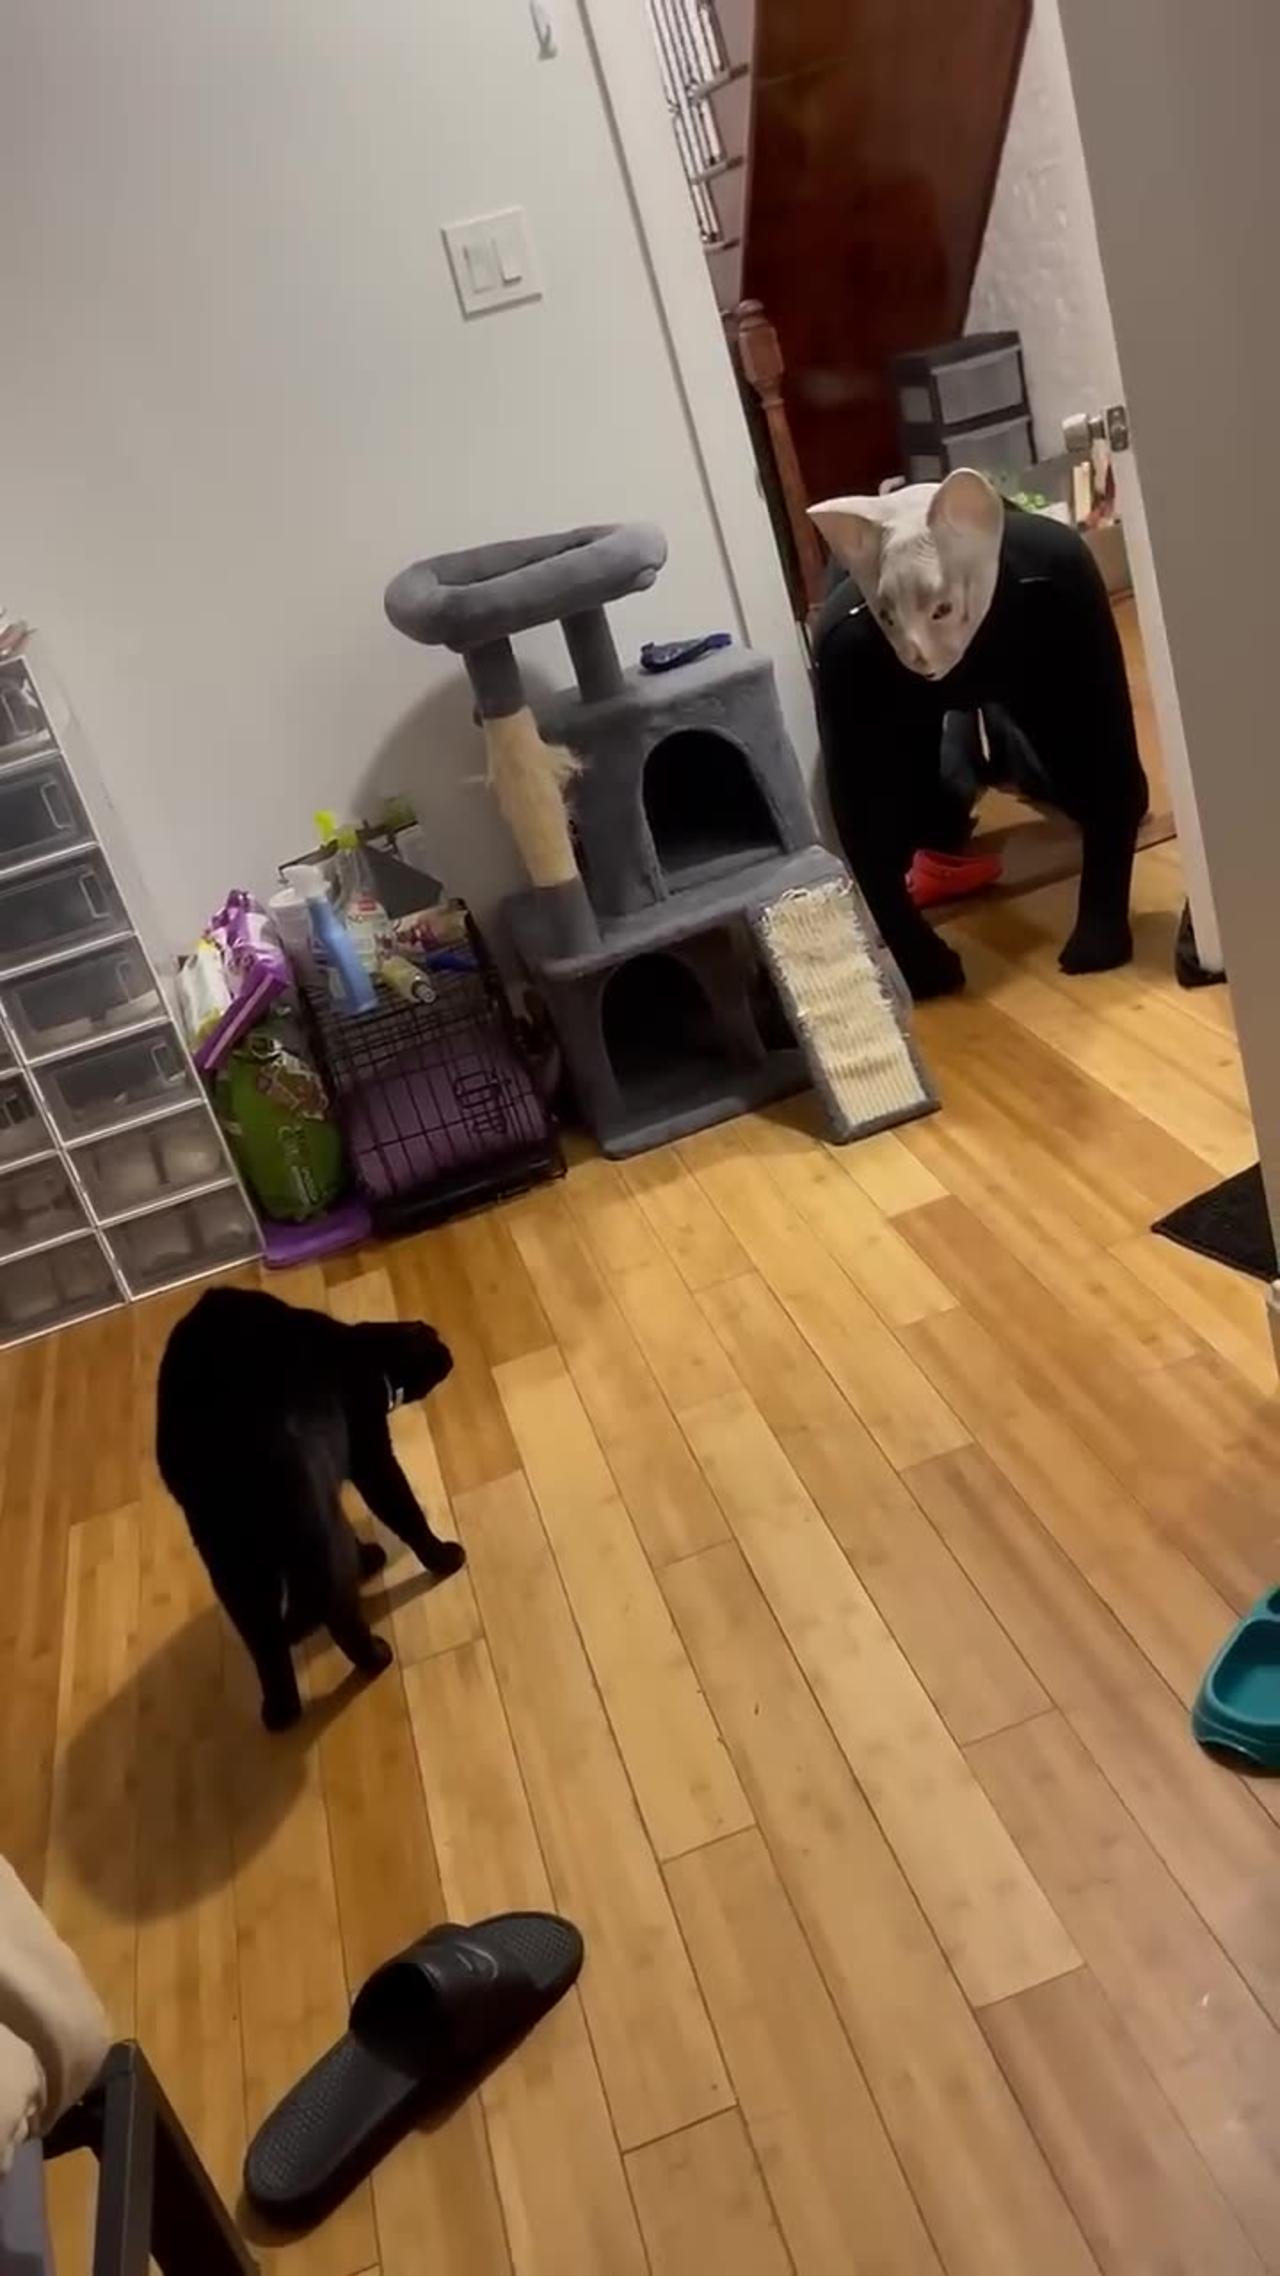 Black Cat Scared Frightened By Person In Mask